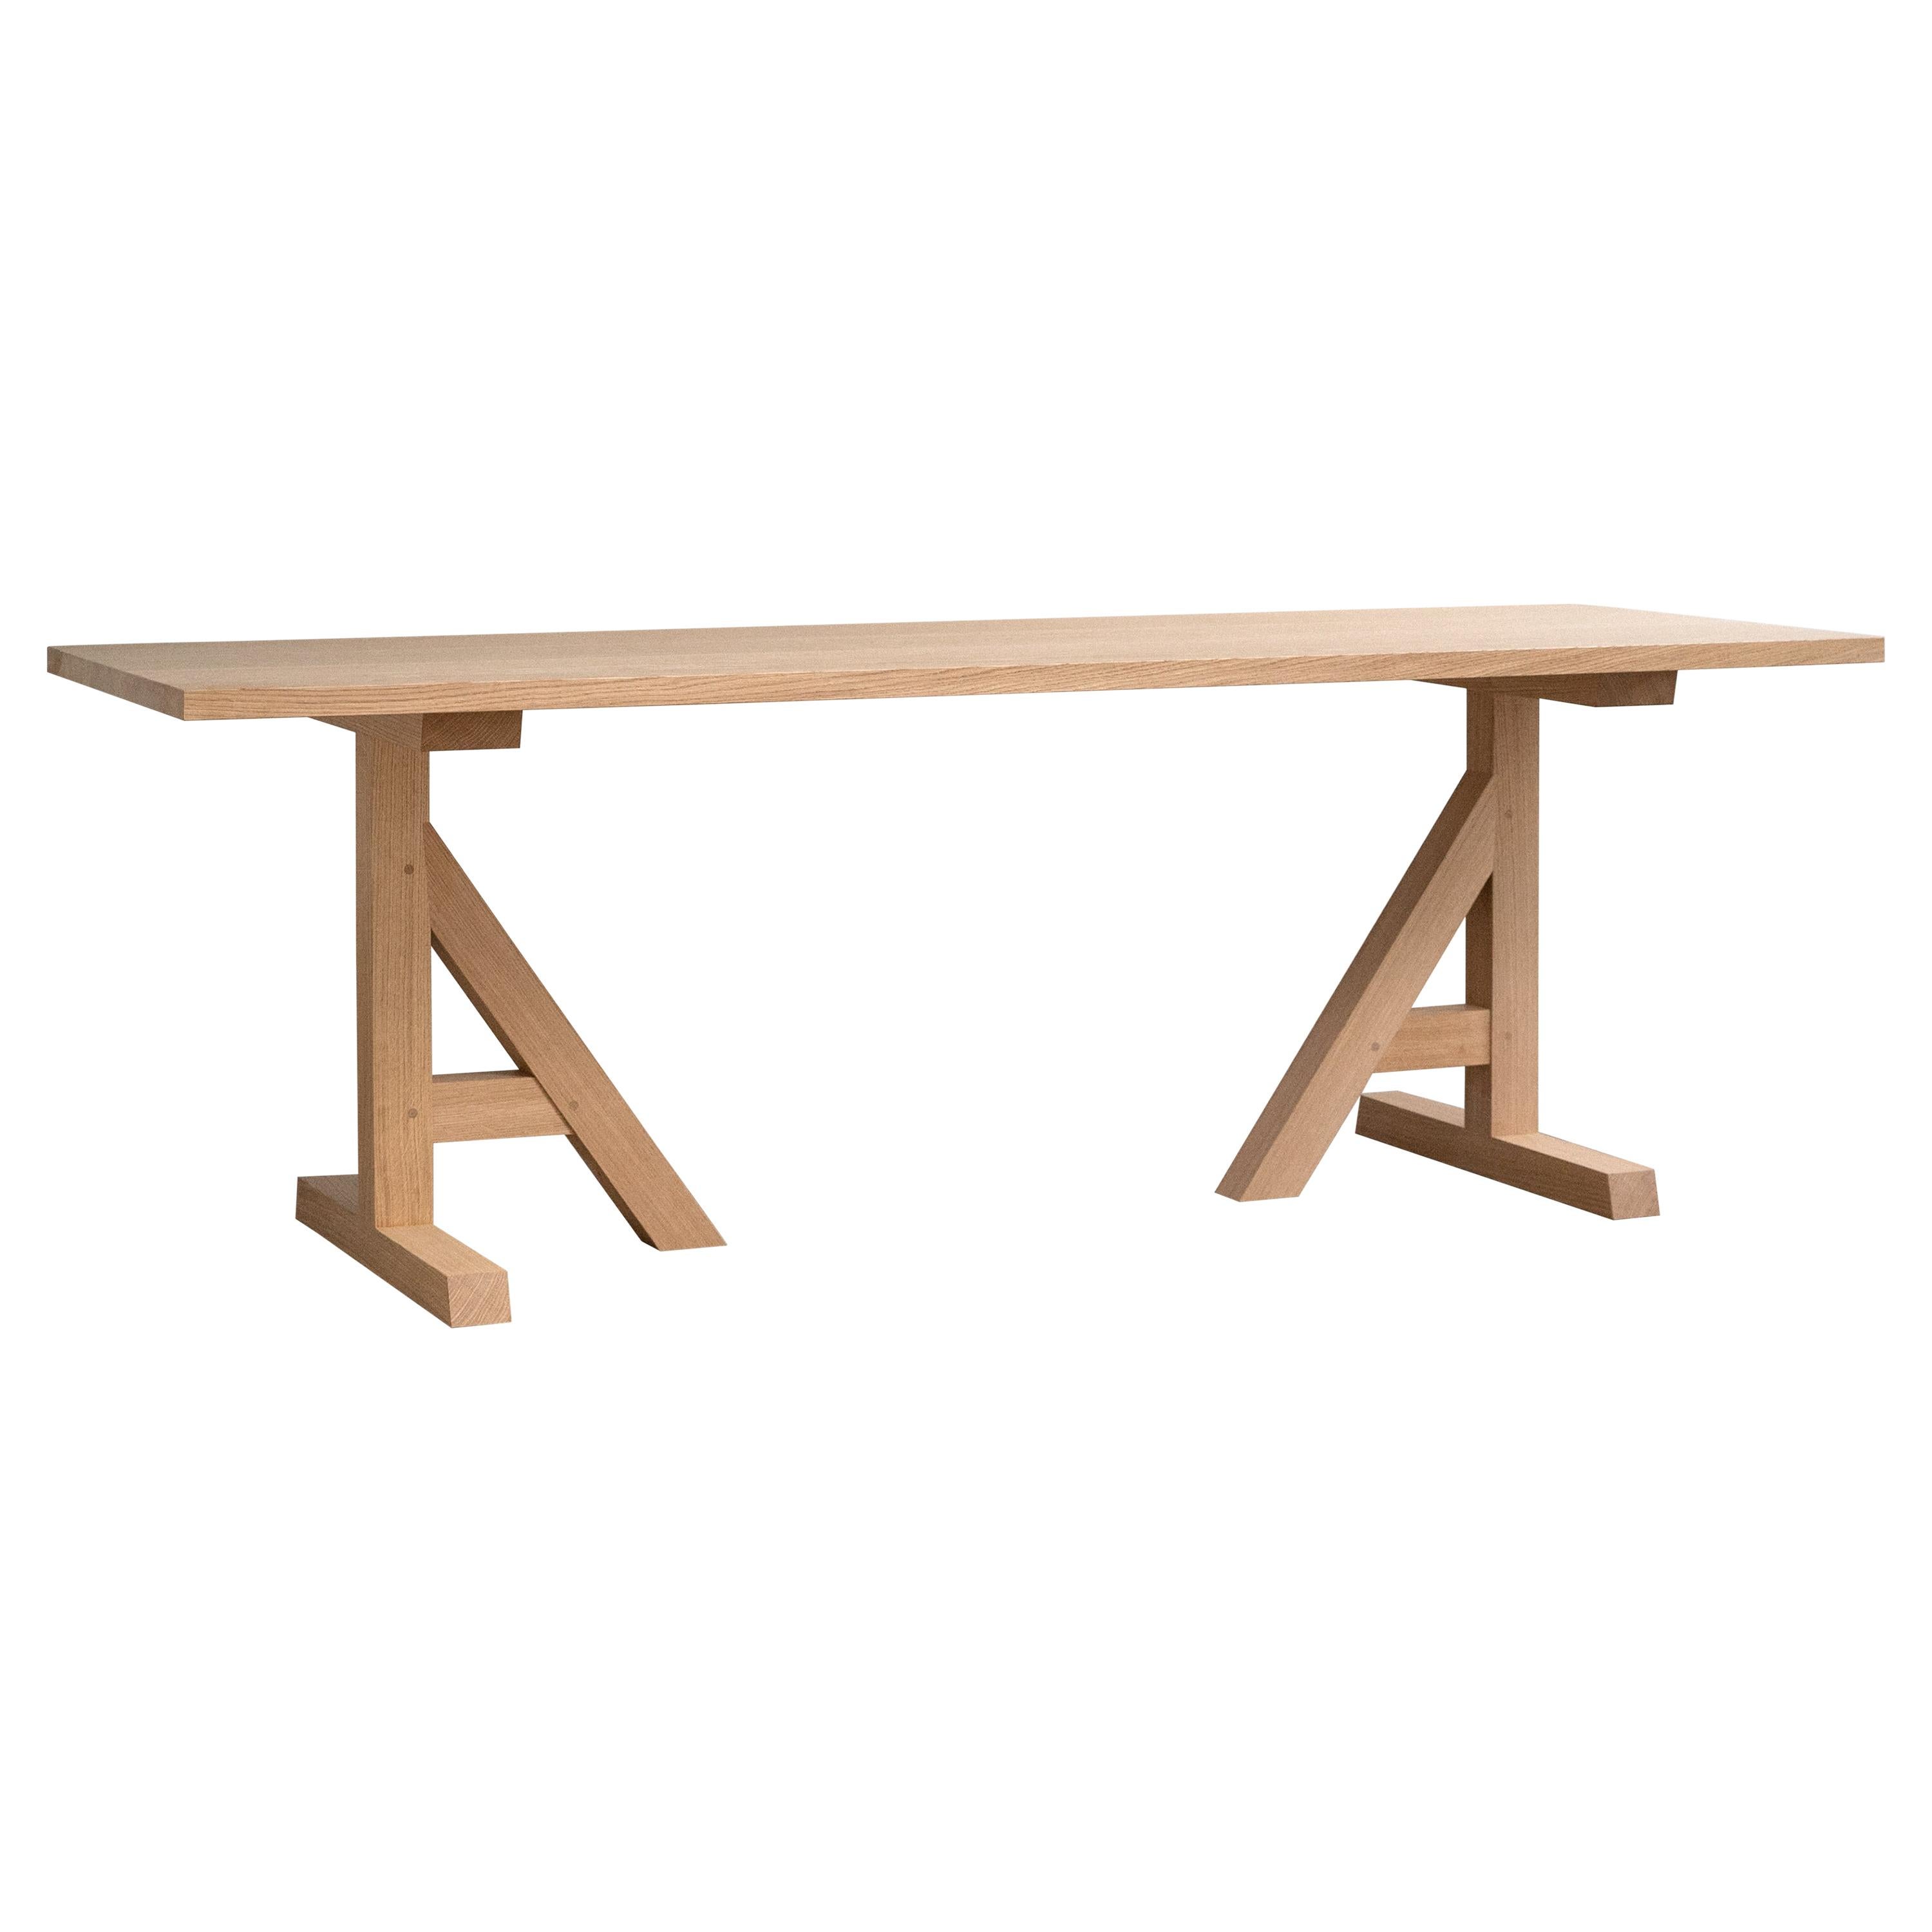 Handcrafted English Oak Table For Sale